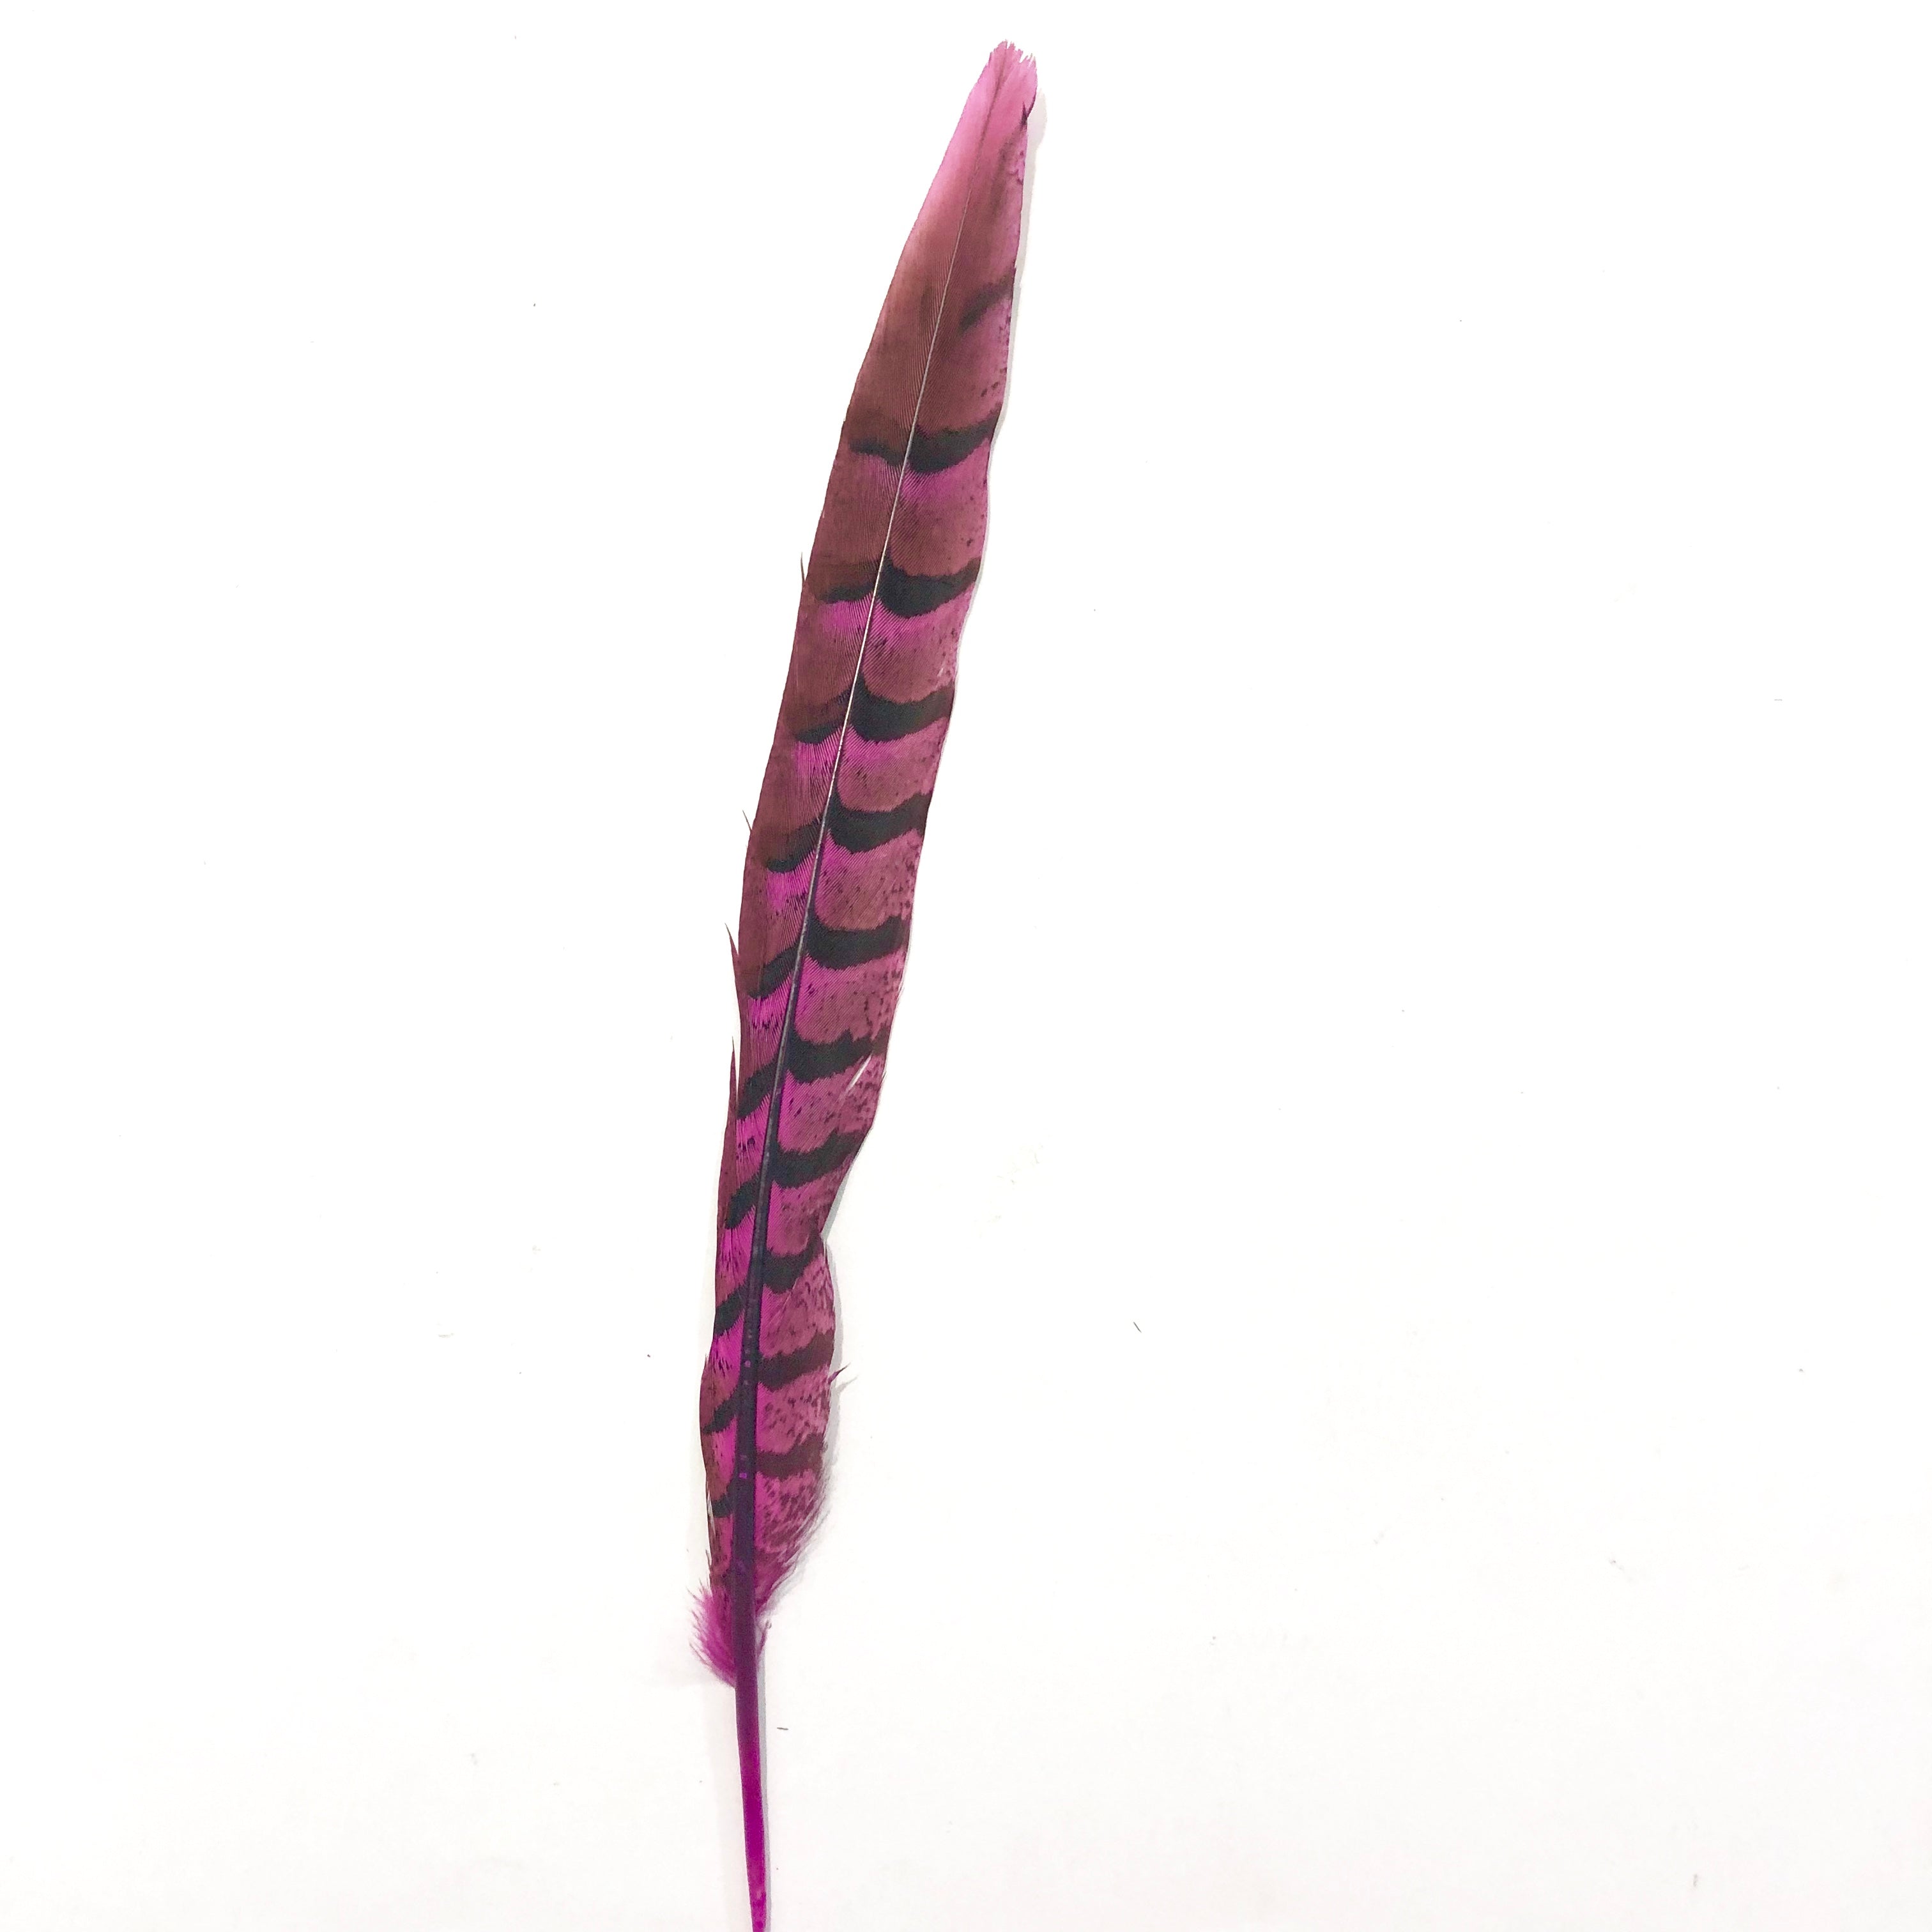 12" to 14" Reeves Pheasant Tail Feather - Hot Pink